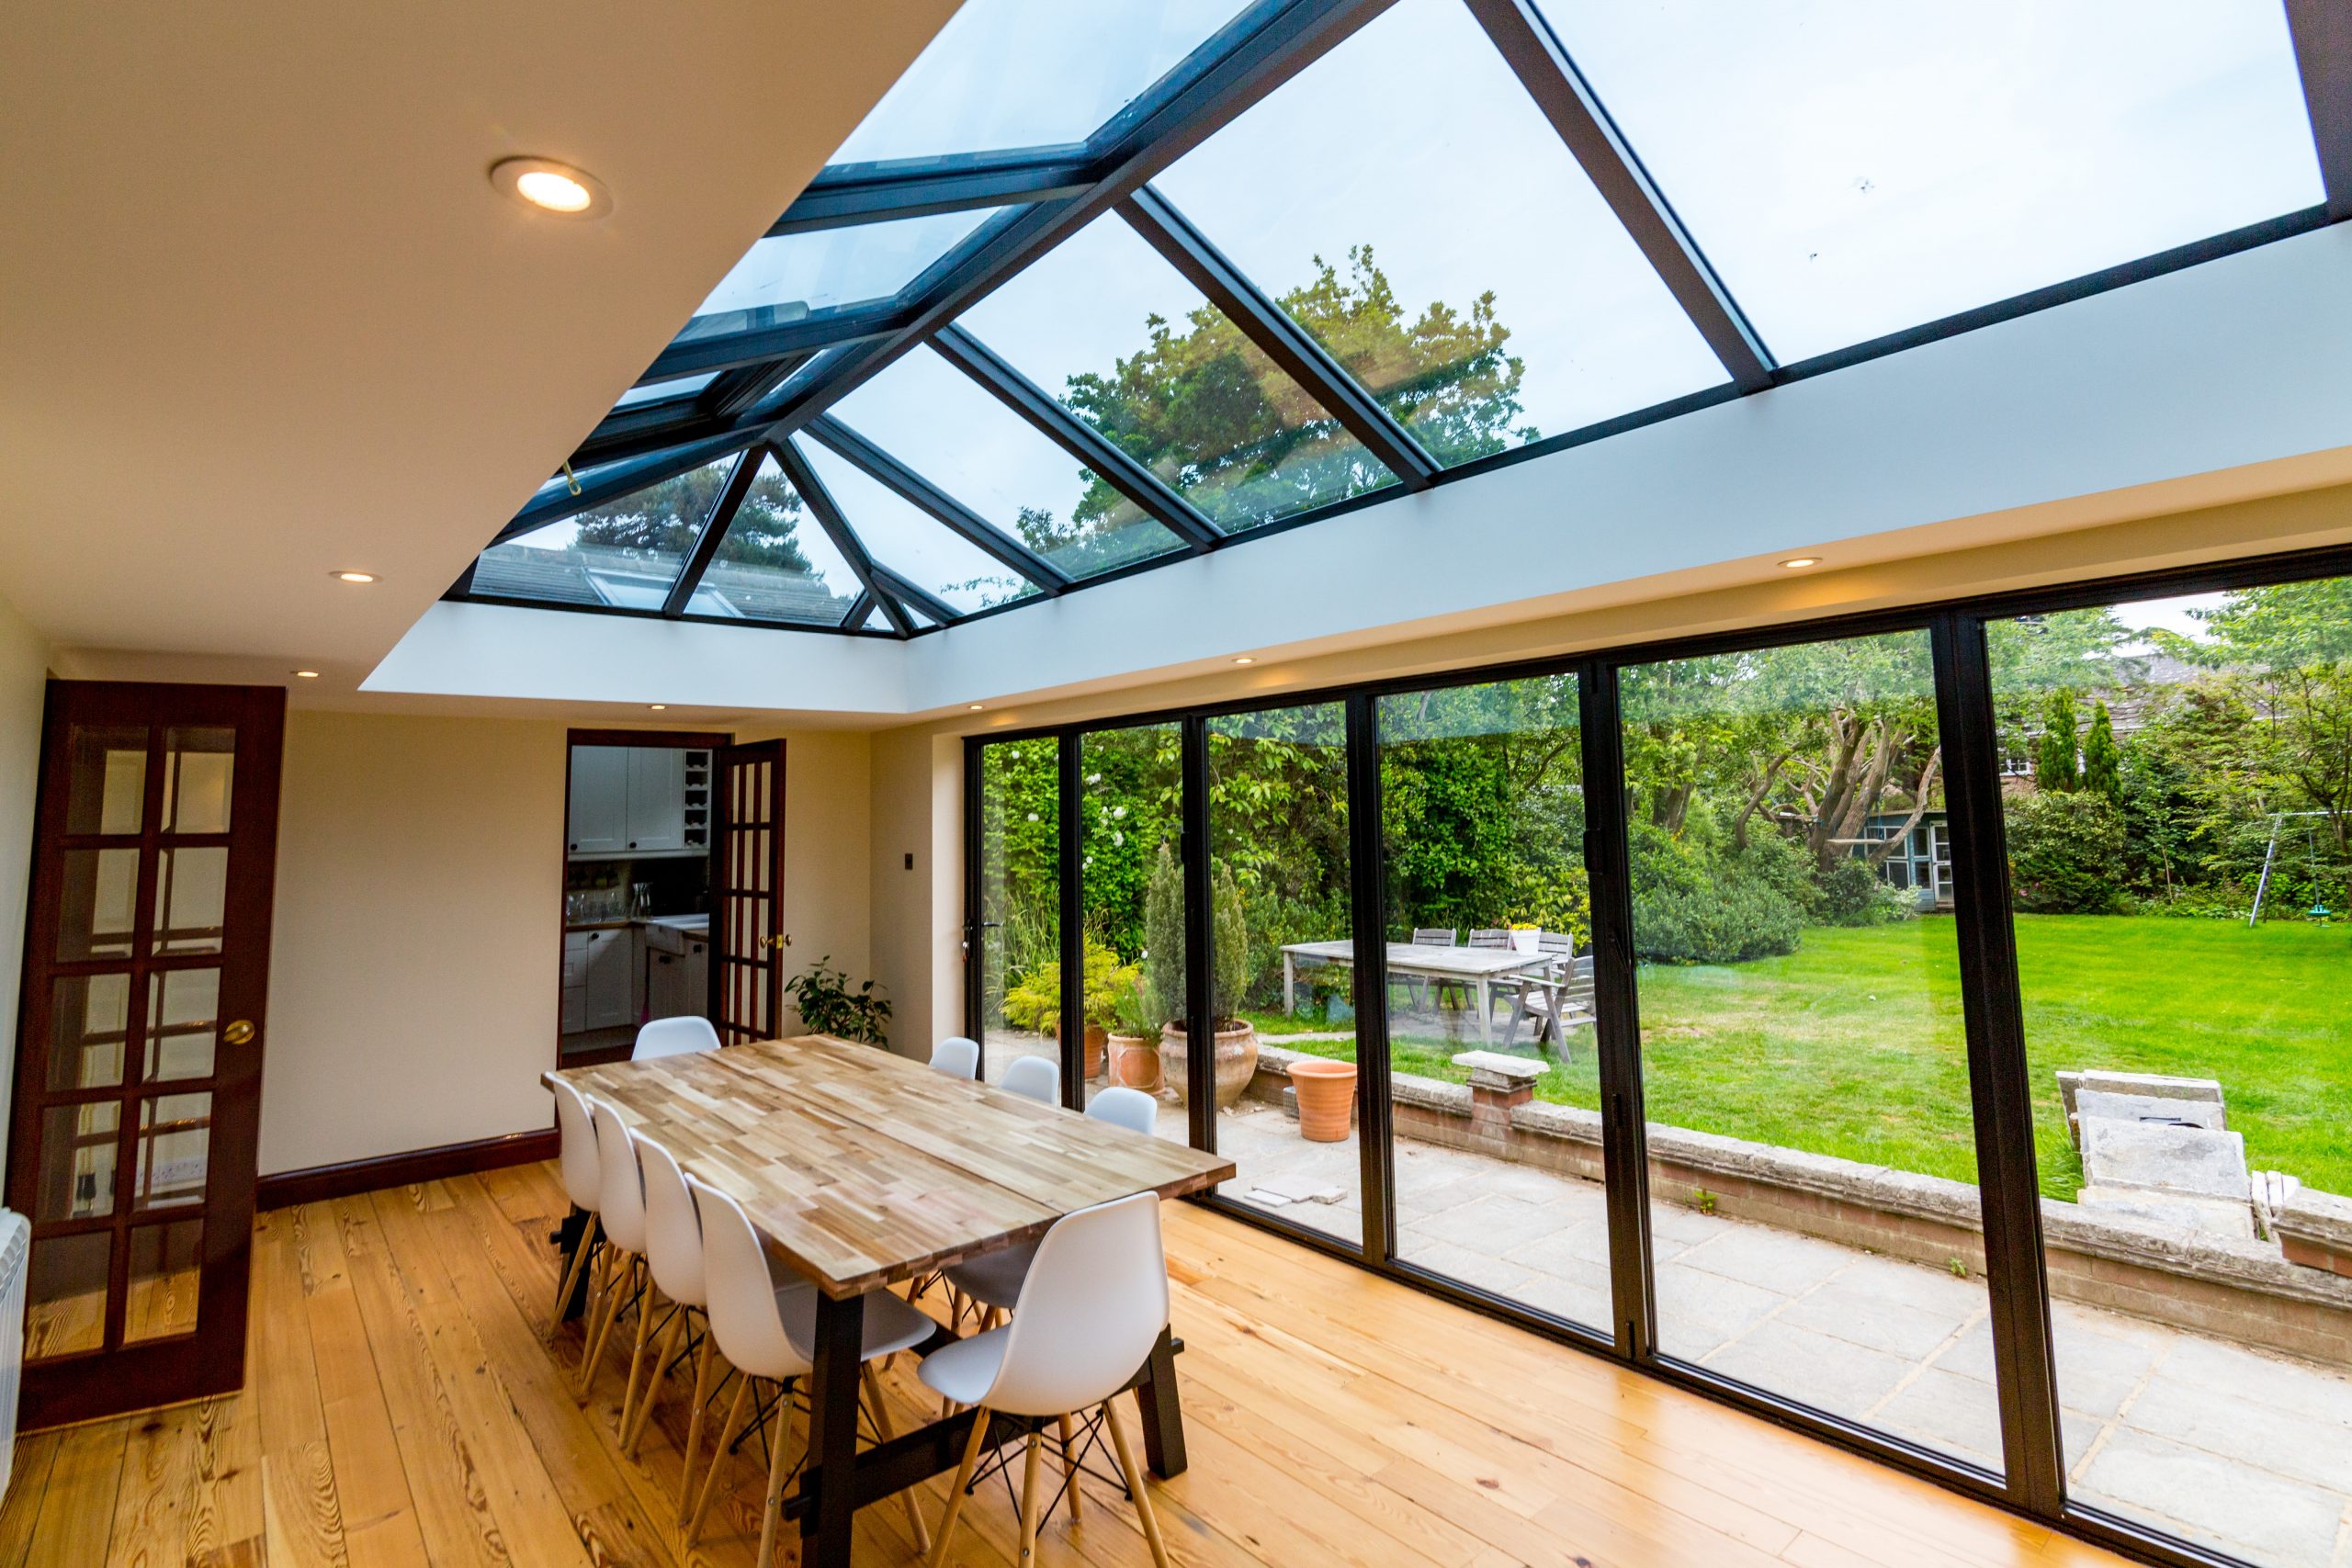 How to design an amazing bespoke conservatory